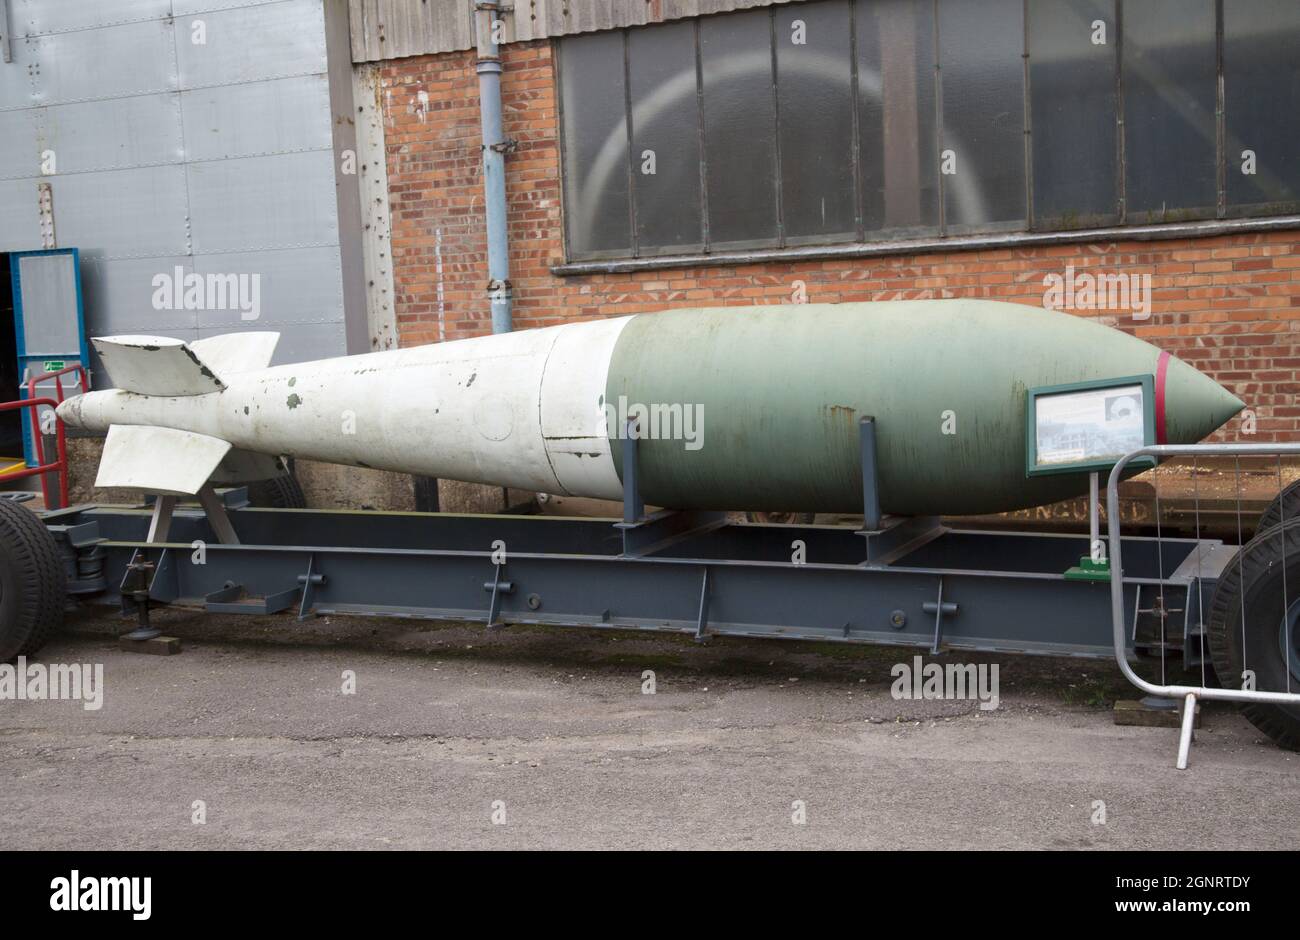 Tallboy 12,000 lb earthquake bomb developed by Barnes Wallis and used by the Royal Air Force in WWII. Brookland Museum, Weybridge, Surrey, England. Stock Photo